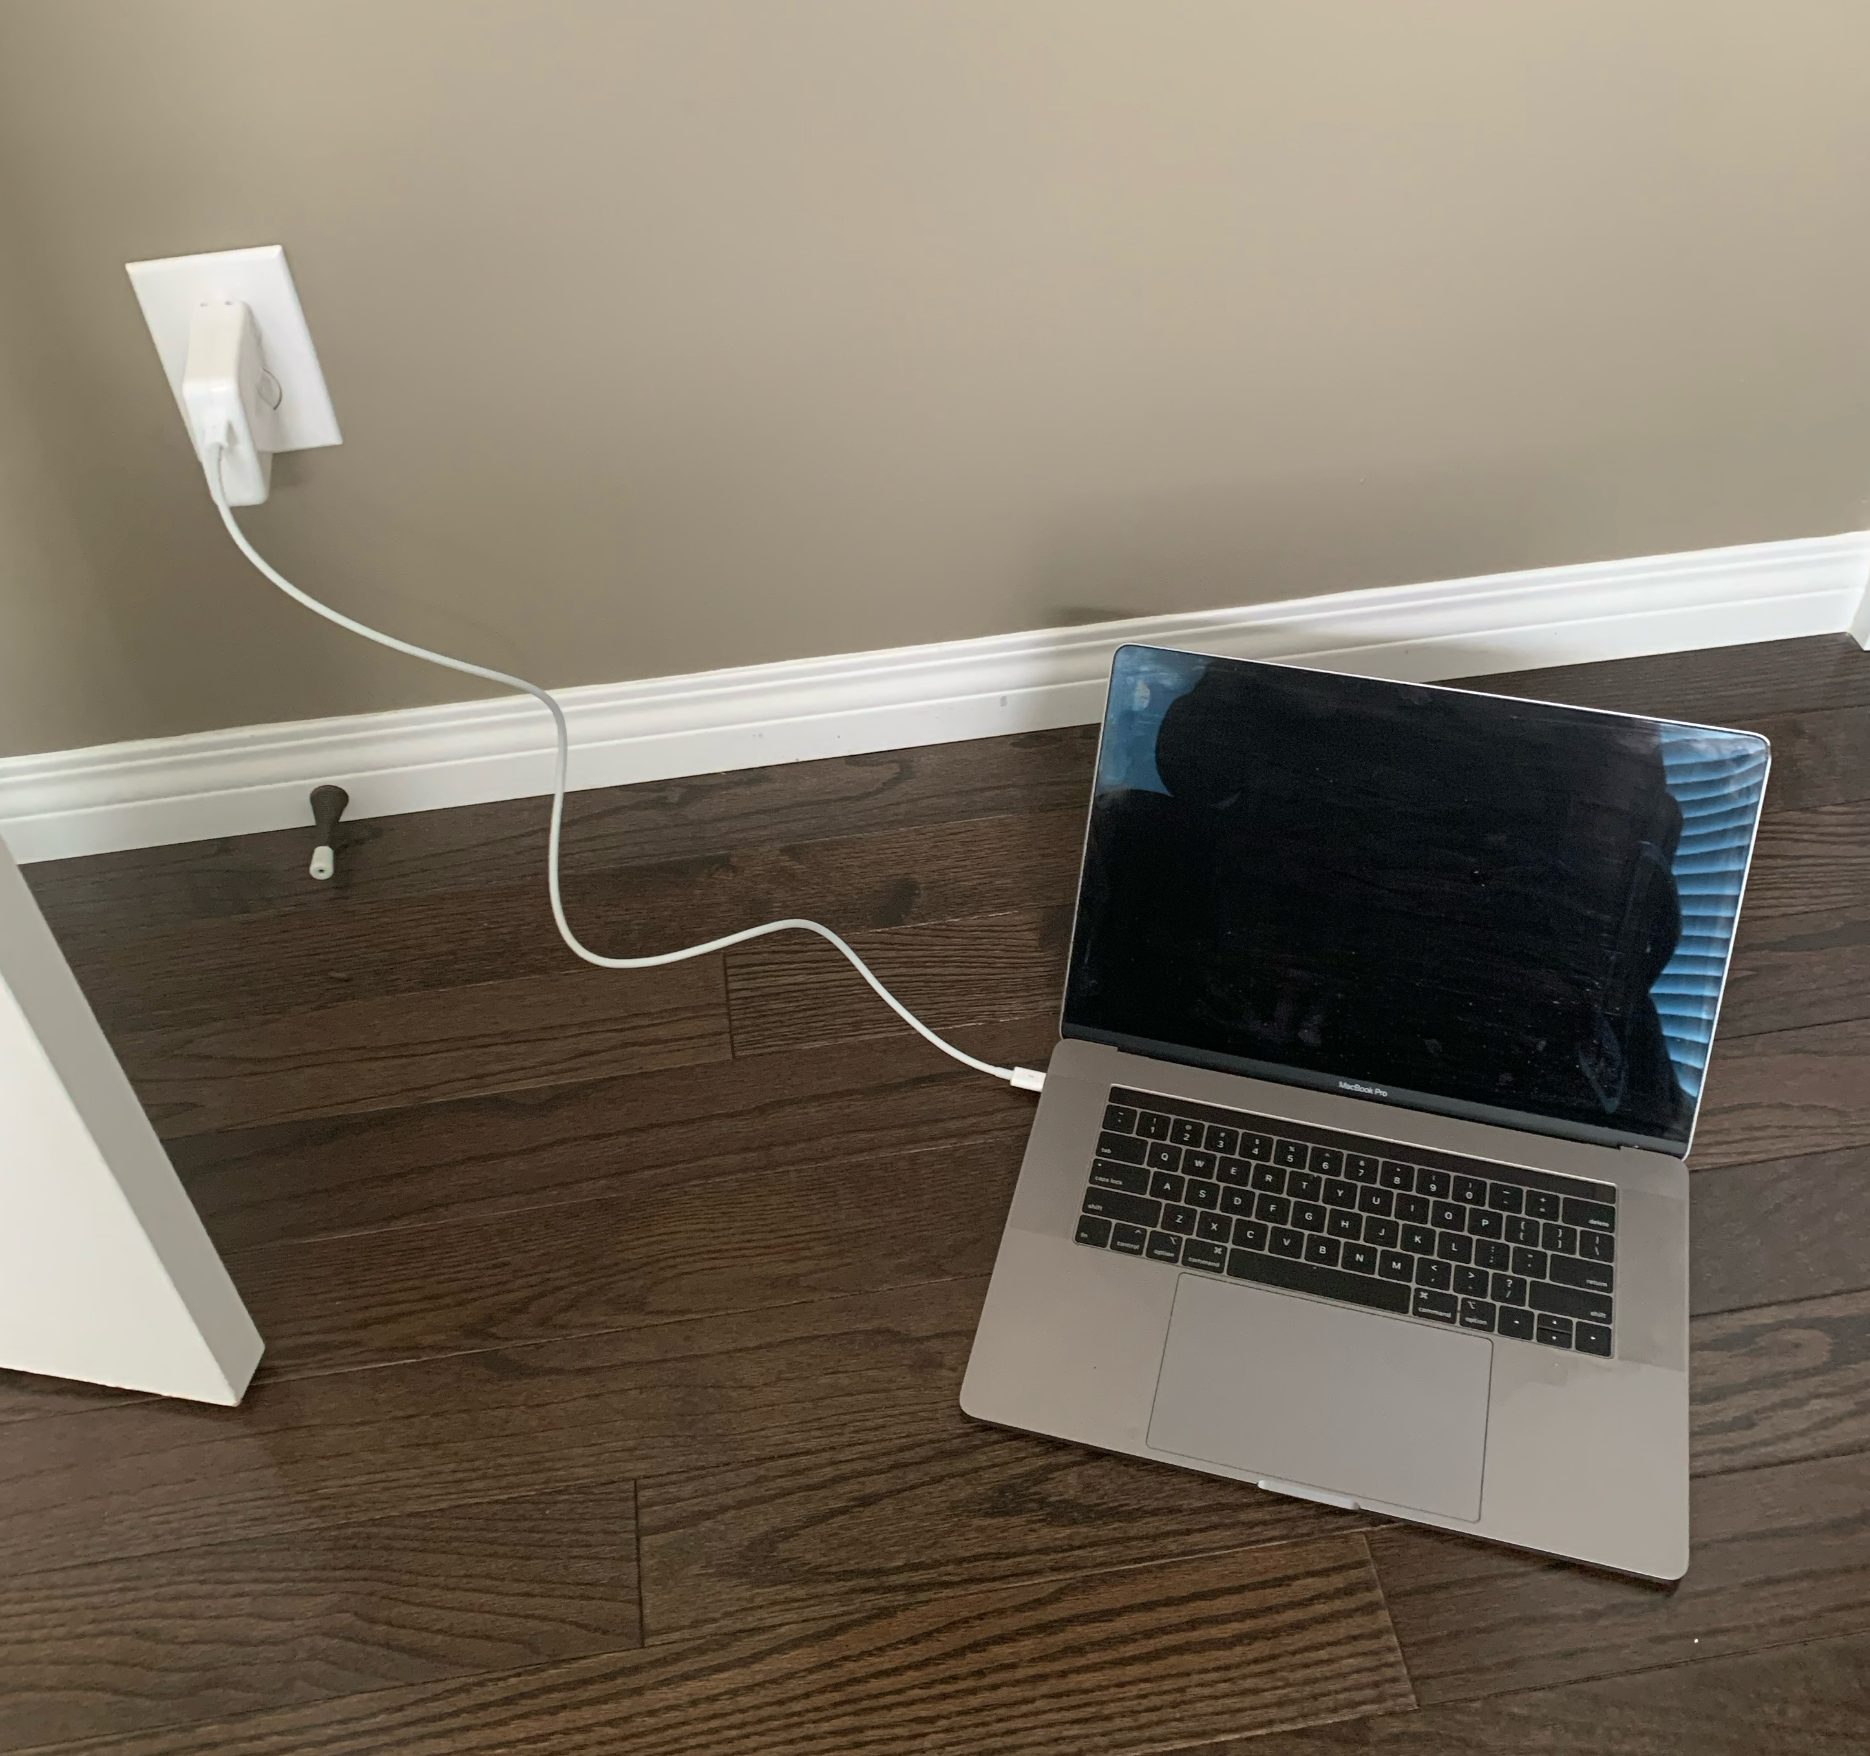 A MacBook Pro on the floor next do a door plugged into a charger with a 2ft long white cable.